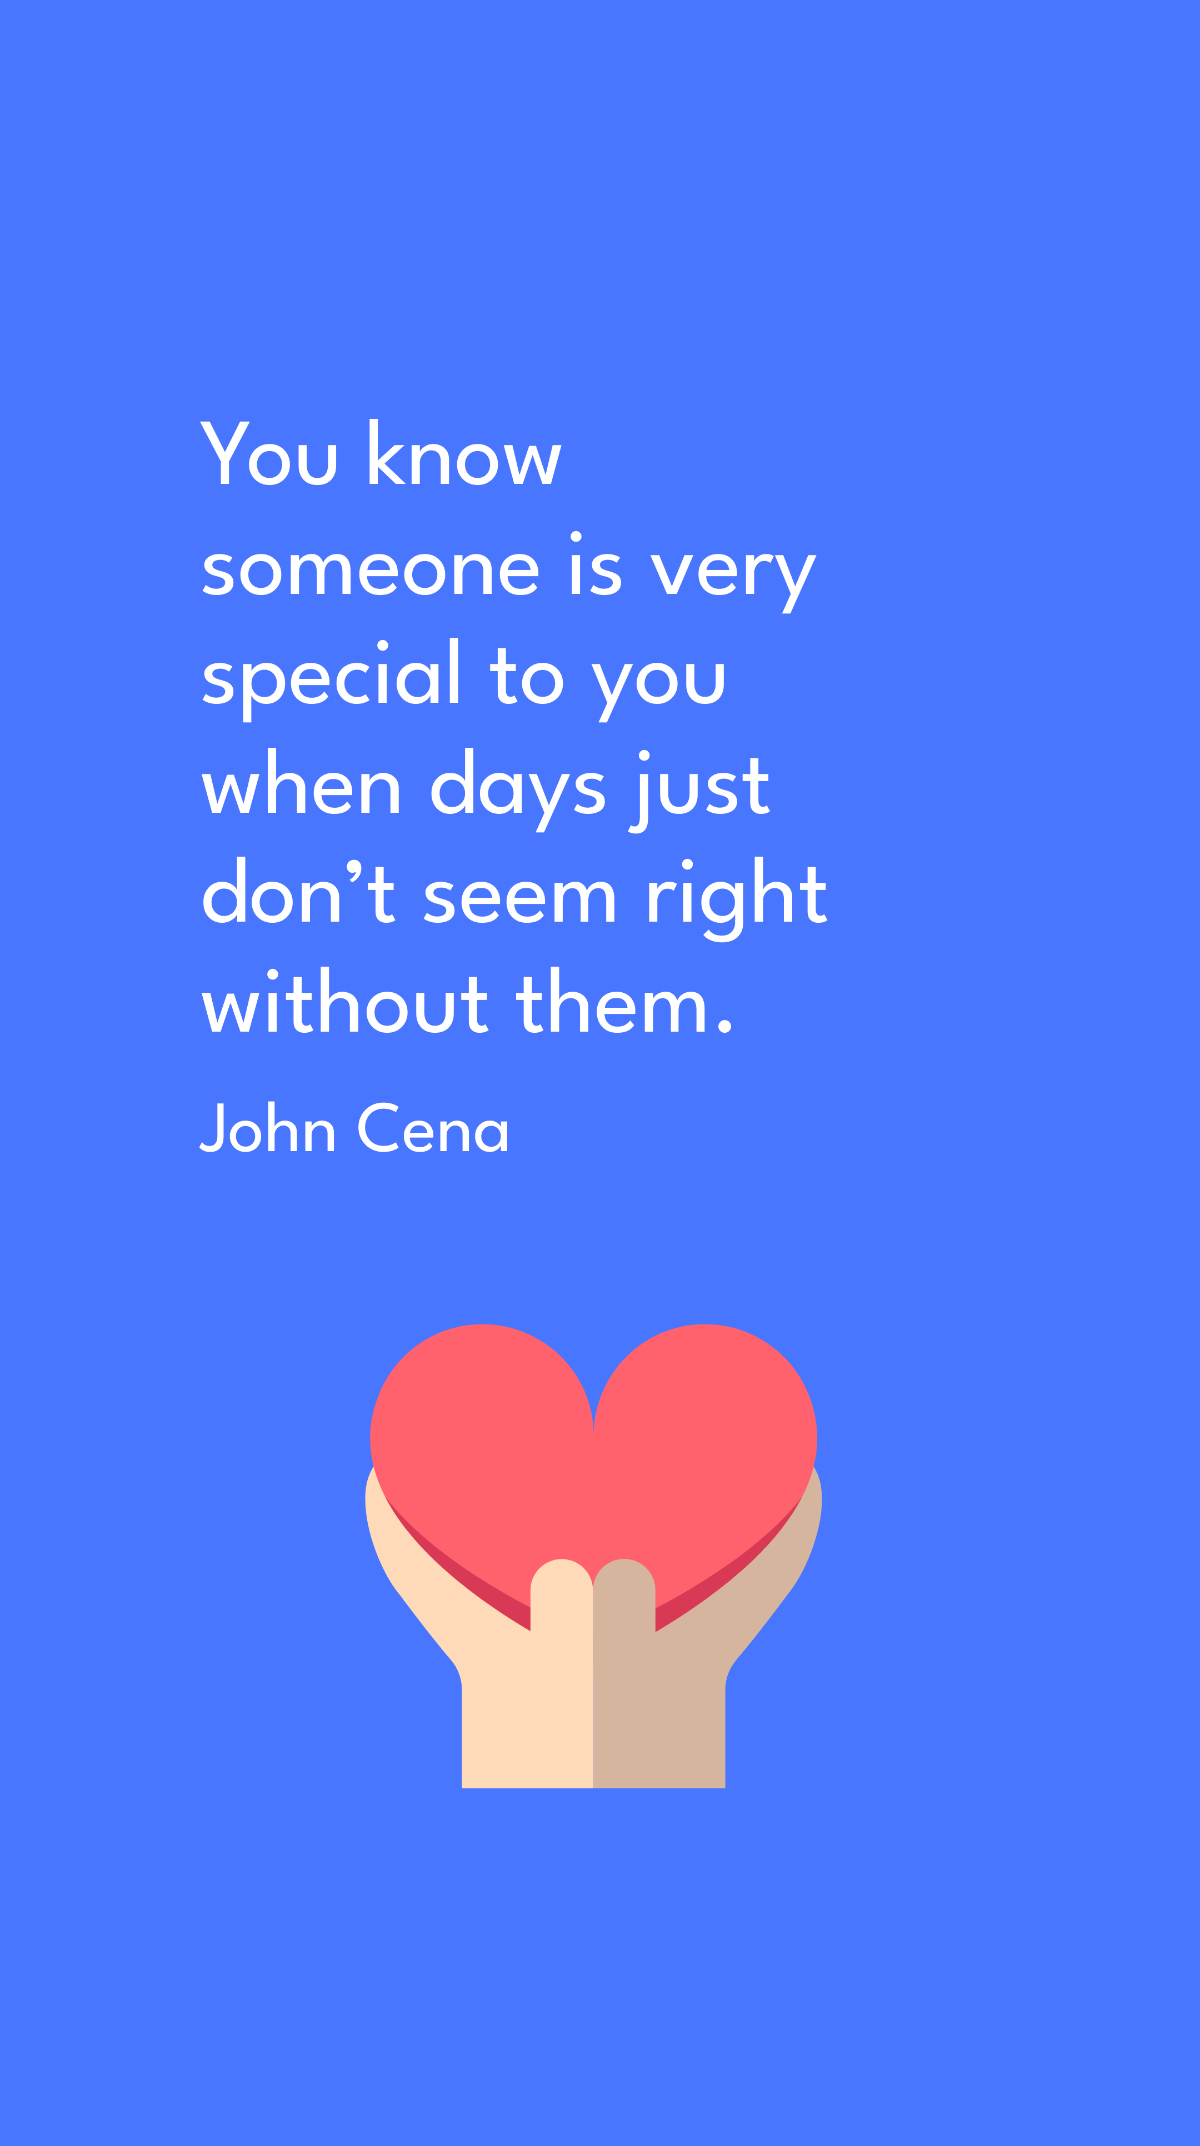 John Cena - You know someone is very special to you when days just don’t seem right without them.